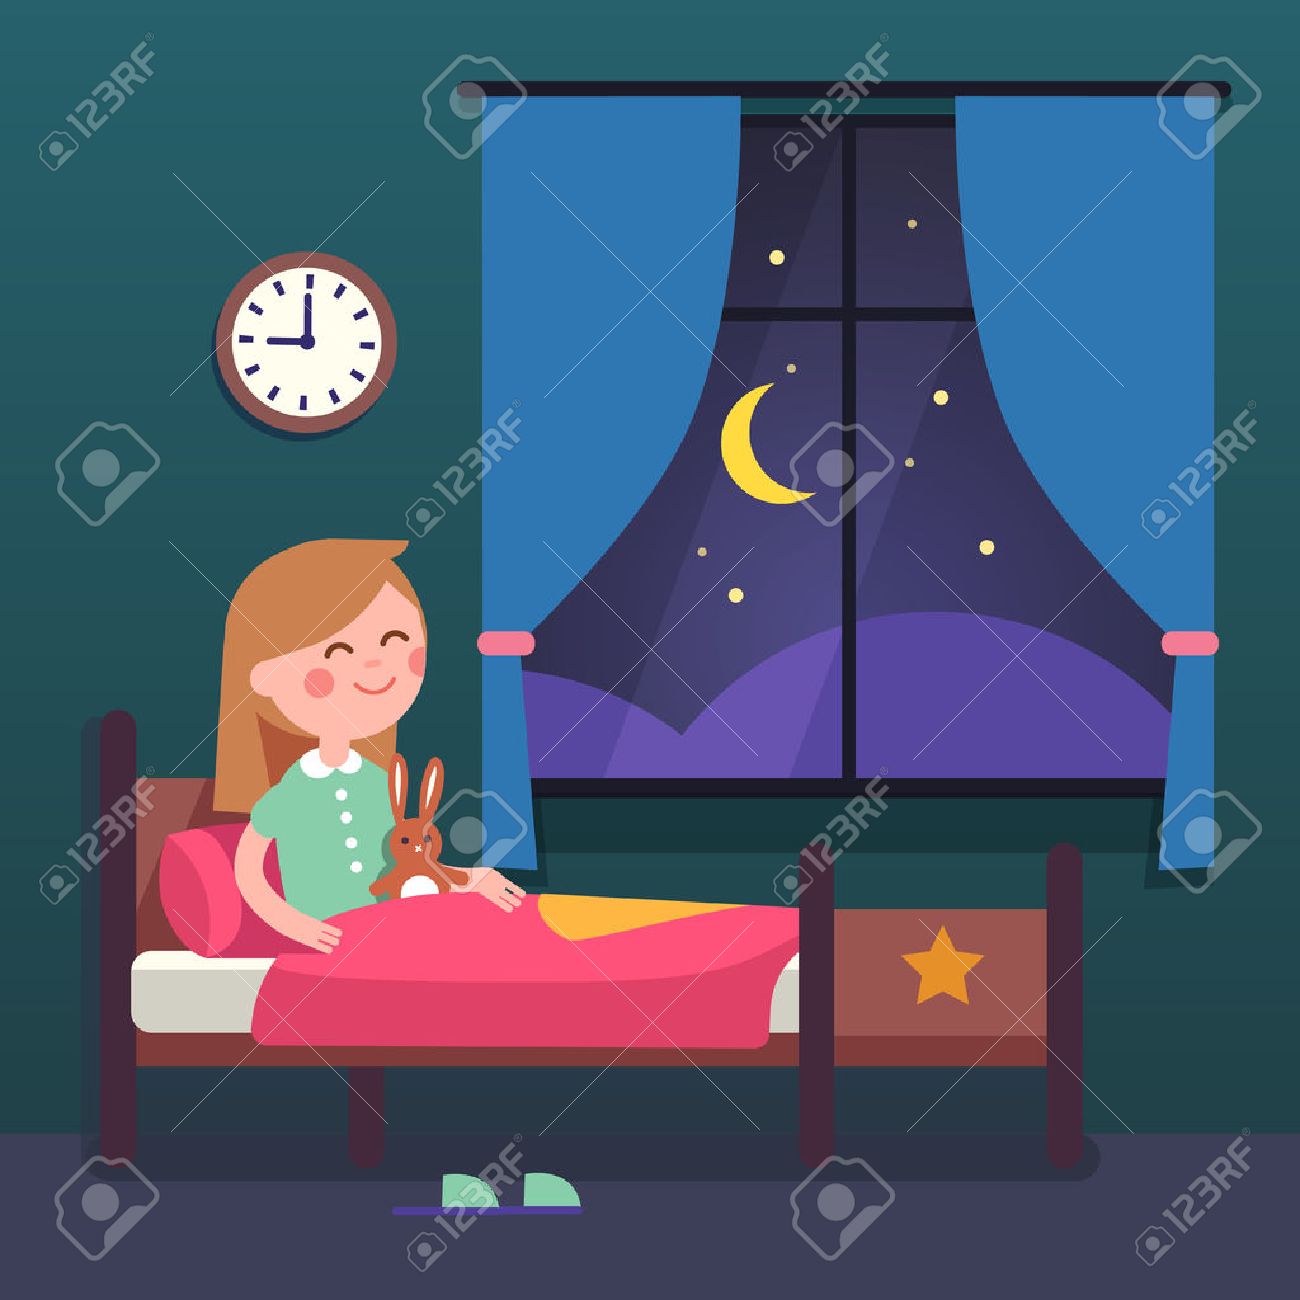 Night time cilpart prissy. Bedtime clipart nighttime